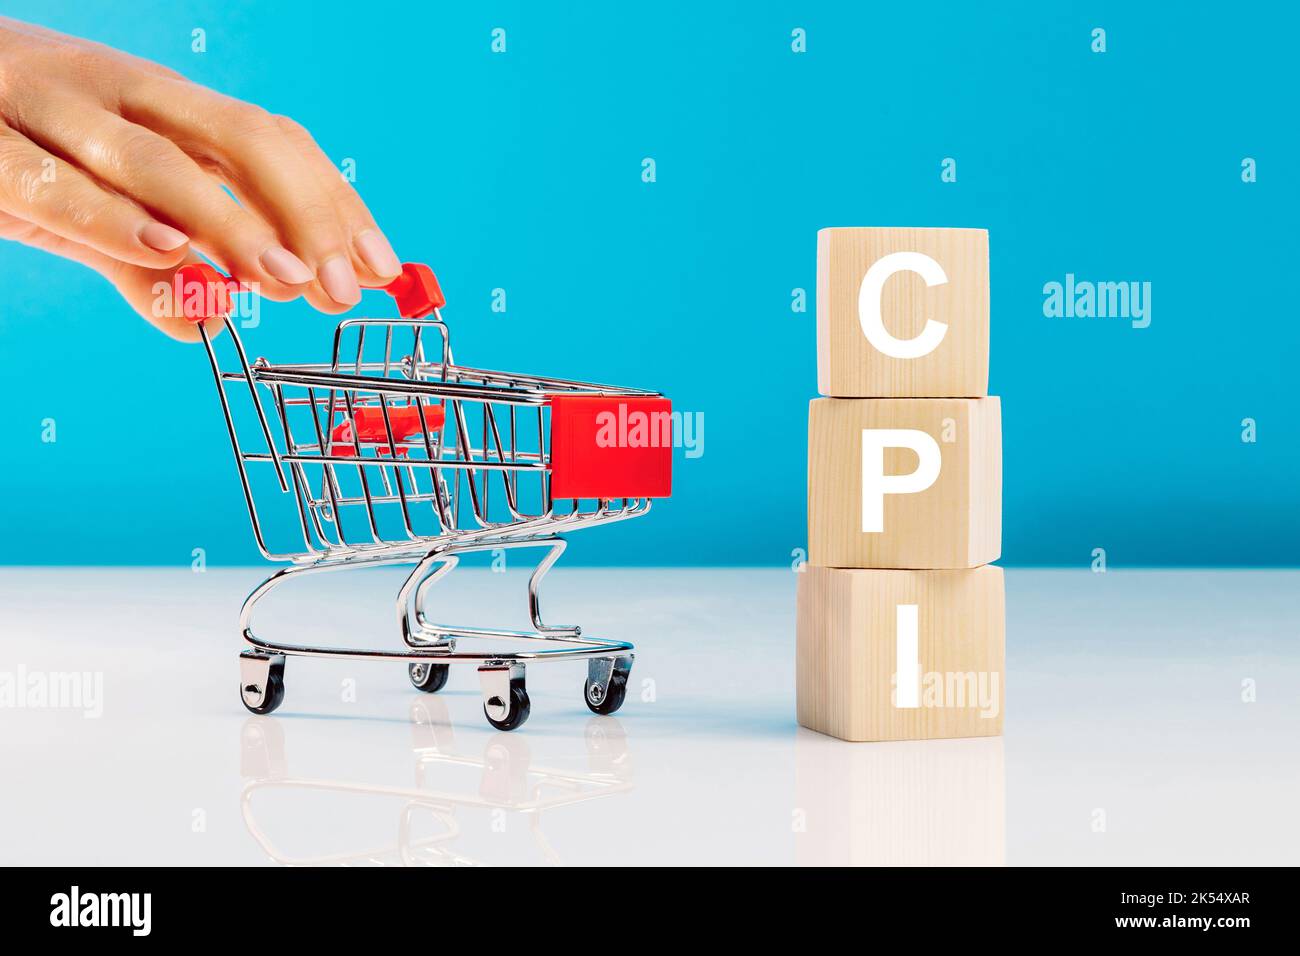 CPI - Consumer Price Index symbol.Letter block in word CPI abbreviation of consumer price index and woman's hand pushing empty shopping cart on blue b Stock Photo